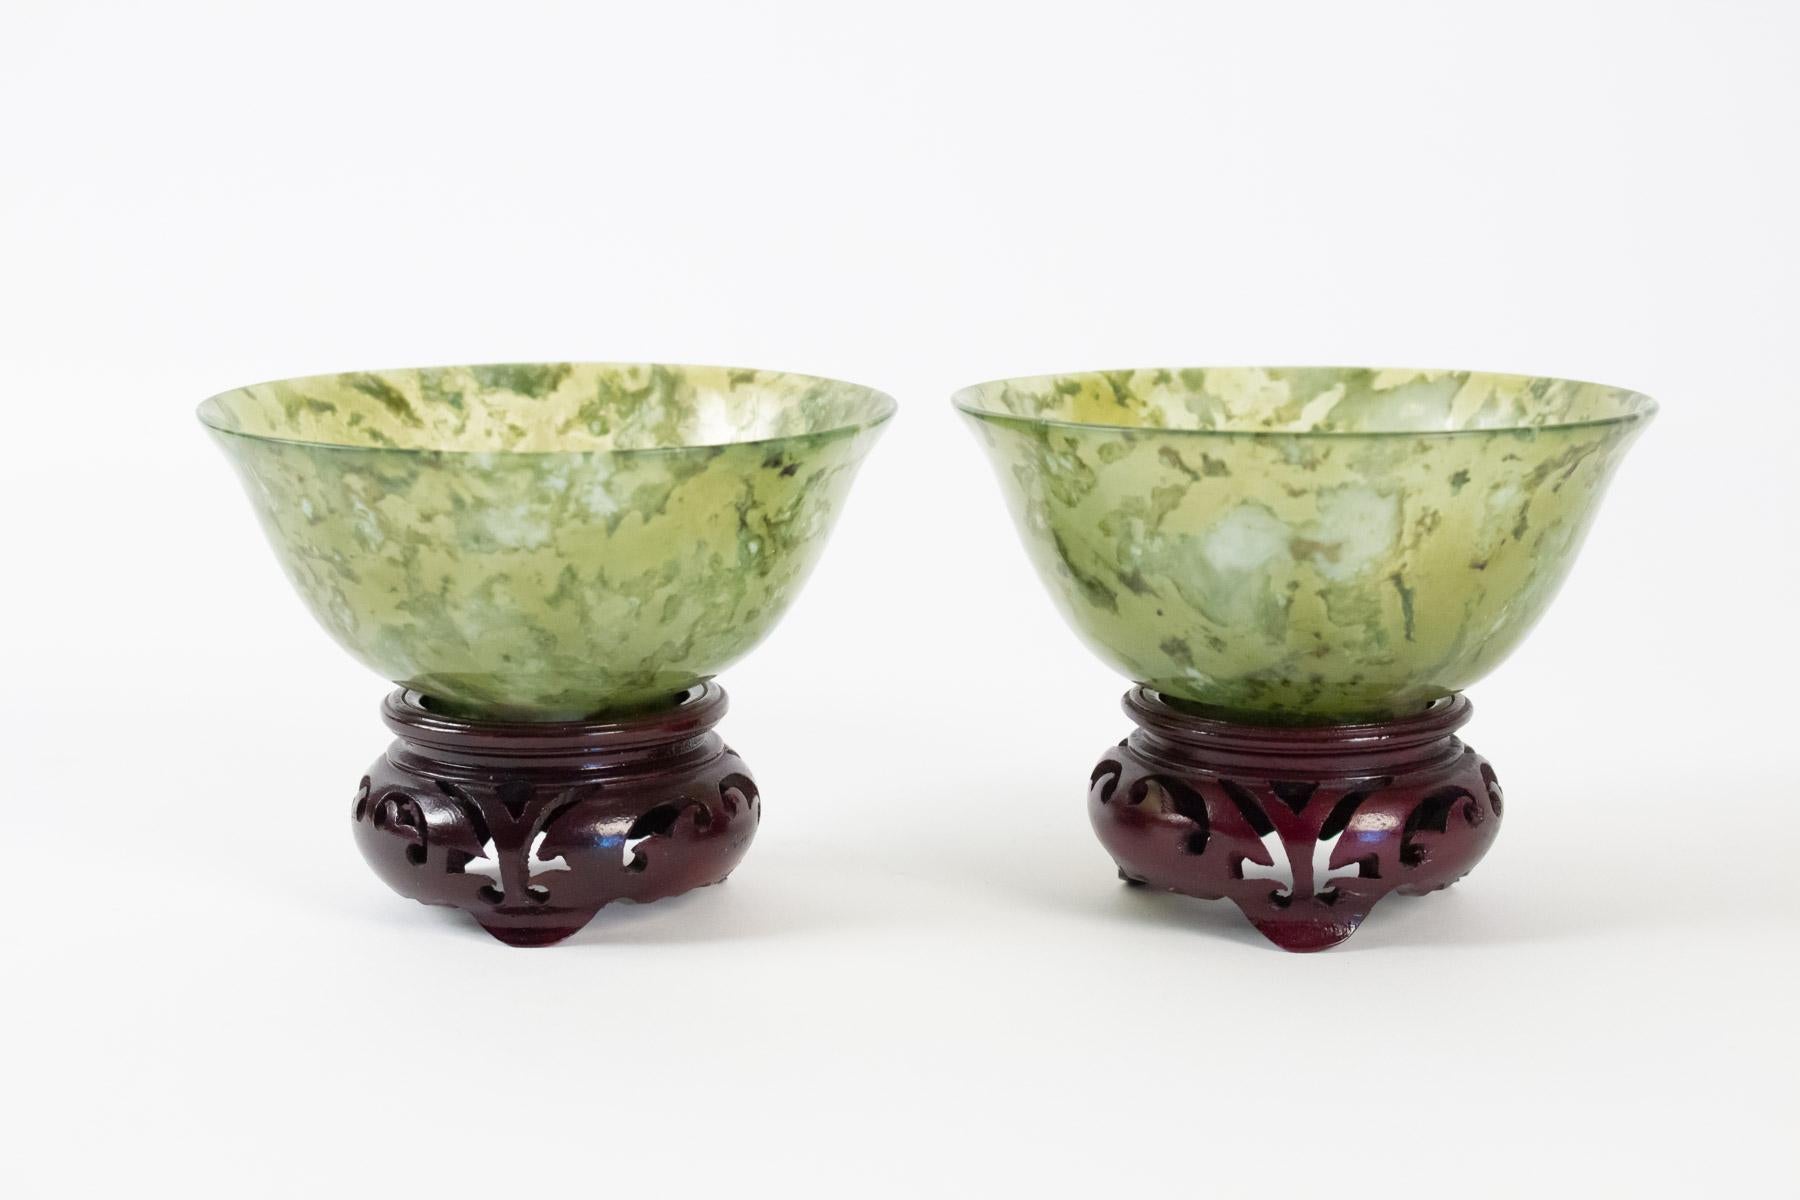 Pair of Bowenite cups, Asian Art, antiquity, mid 20th century, China, carved wood base.
Measures: D 10cm, H 7cm with the base.